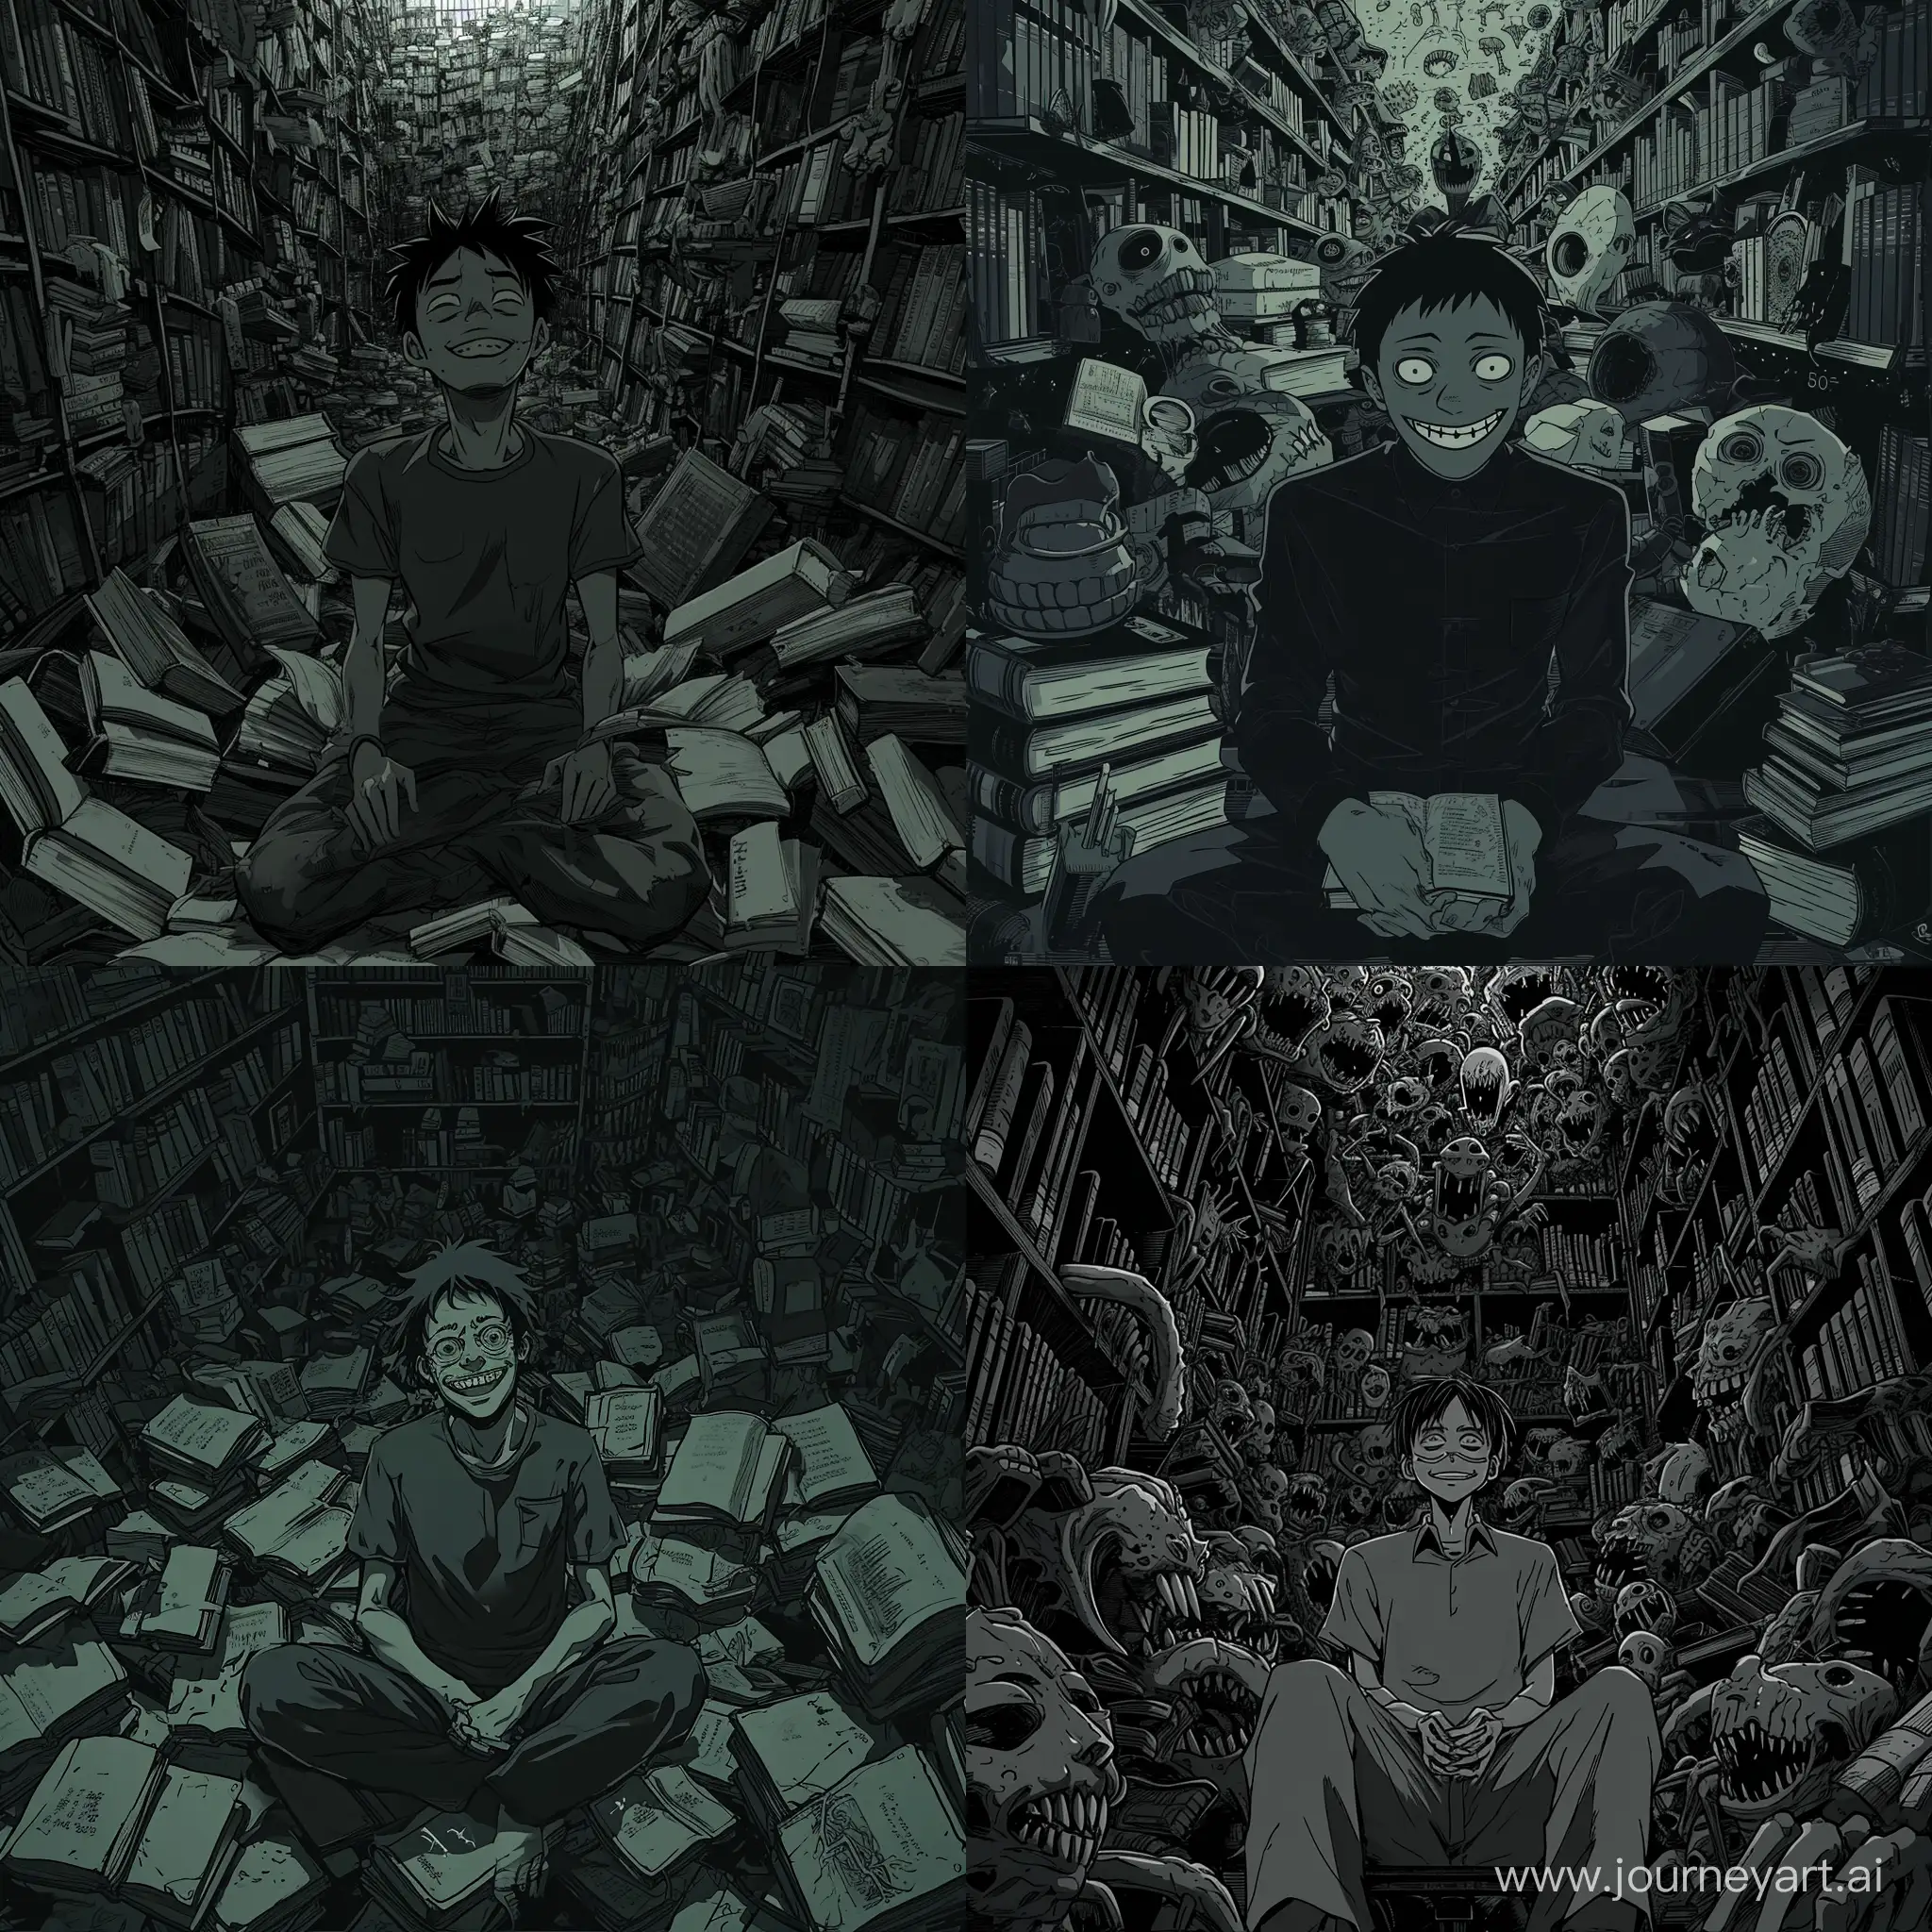 in a dark and eerie anime style reminiscent of Junji Ito's works a man with an smile sits amidst a surreal library of bizarre, eldritch books. The color temperature is a chilling monochromatic grayscale